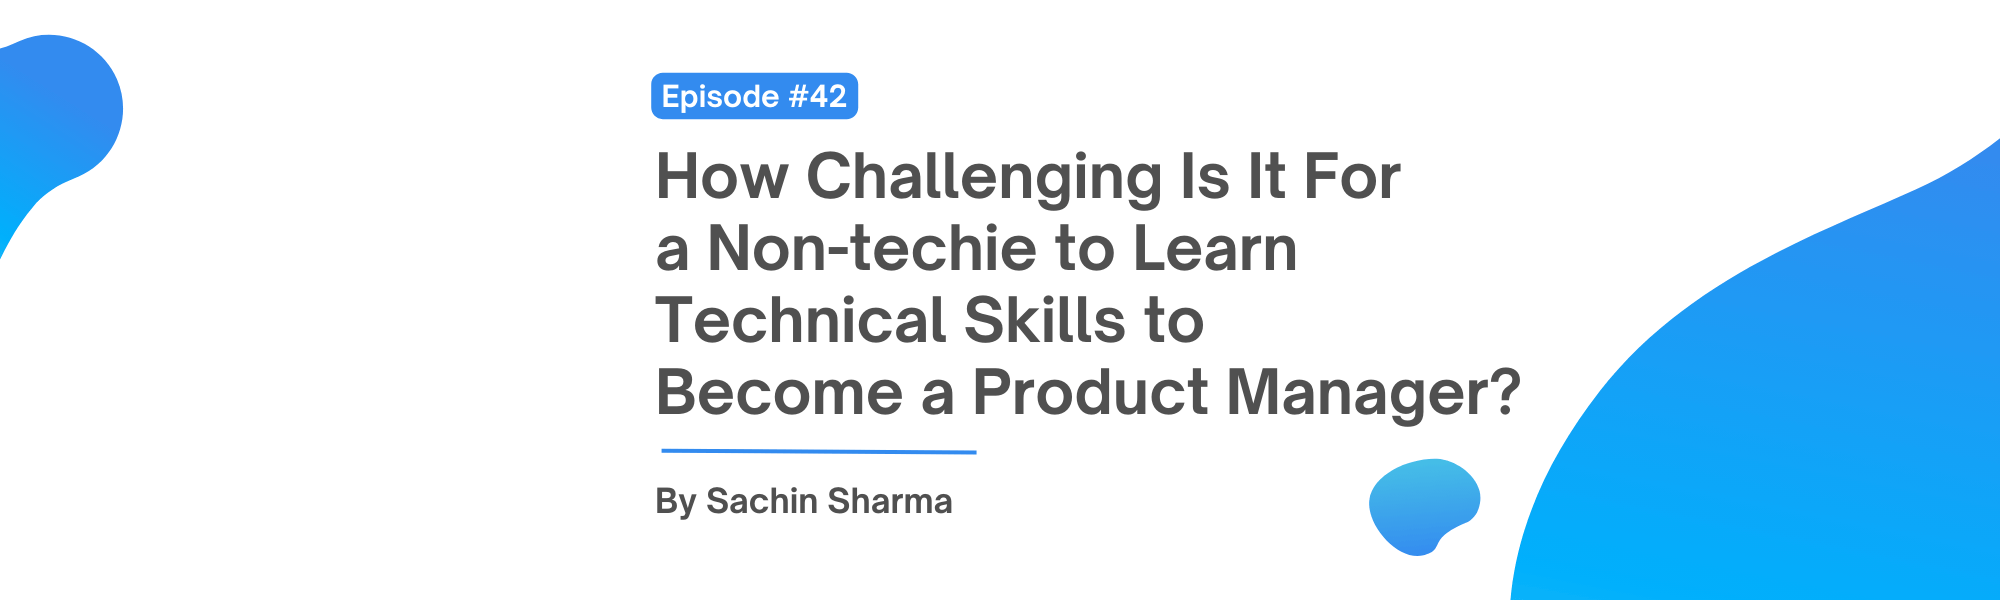 How Challenging Is It For a Non-techie to Learn Technical Skills to Become a Product Manager?